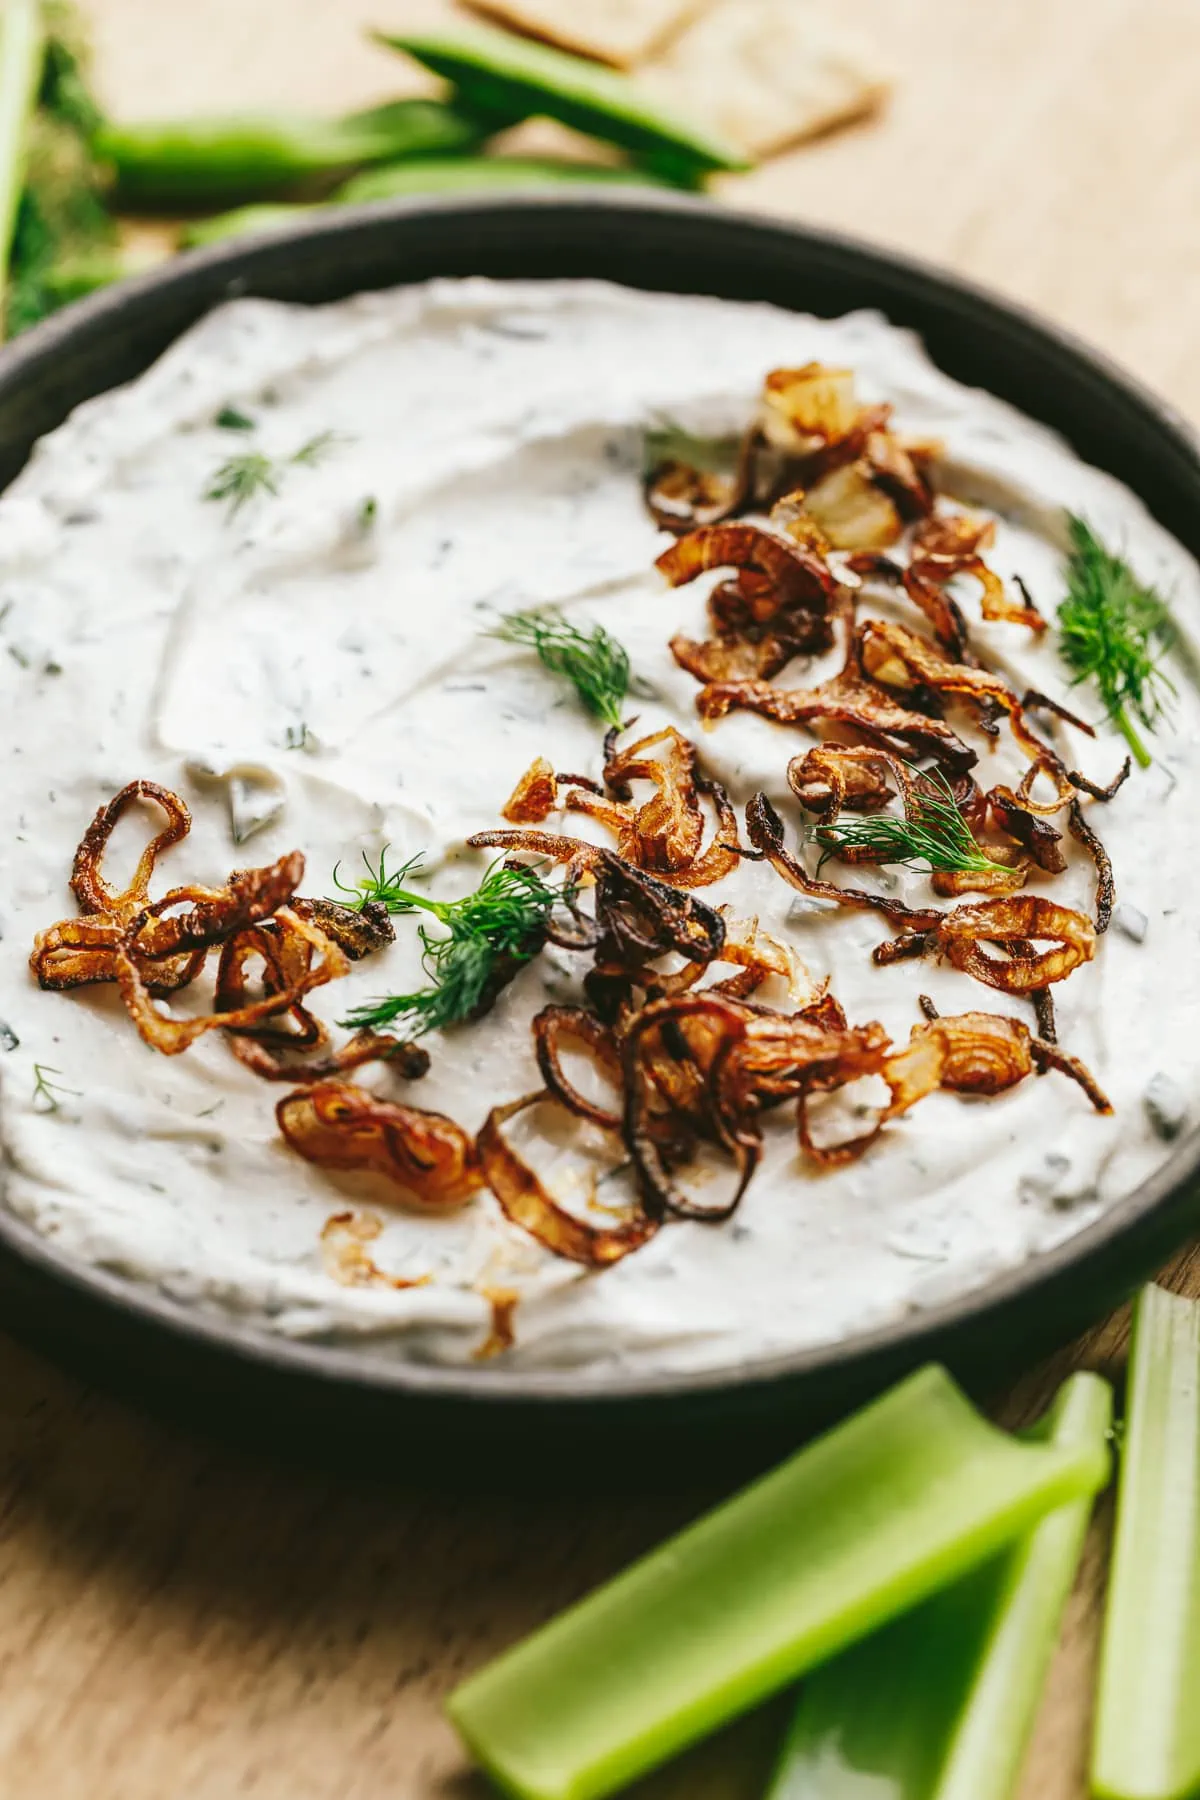 Cottage cheese dip with dill garnish and celery.